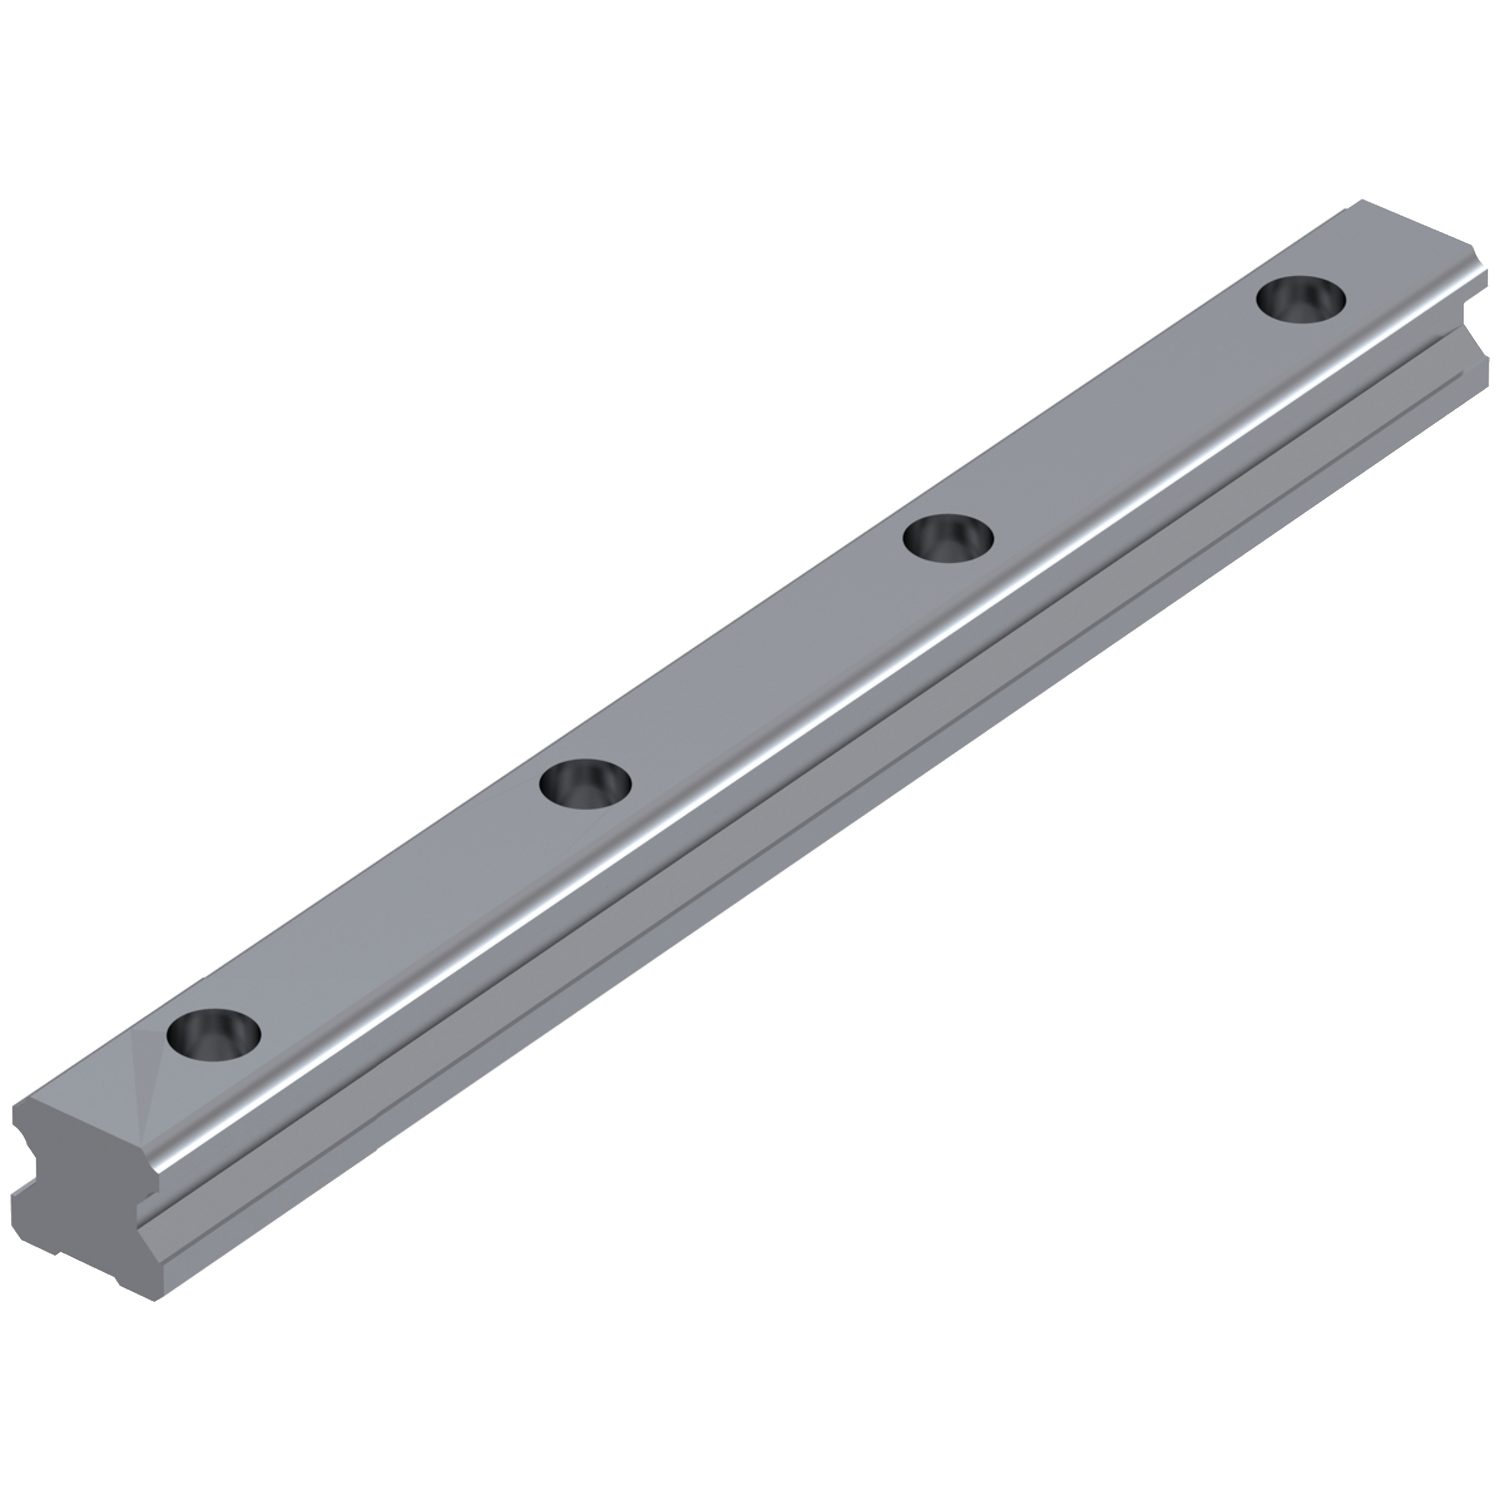 Linear Guideways Linear guideways, which can run alongside lead screws, can support very high loads and provide smooth linear motion. For more information, see our linear guideways page.